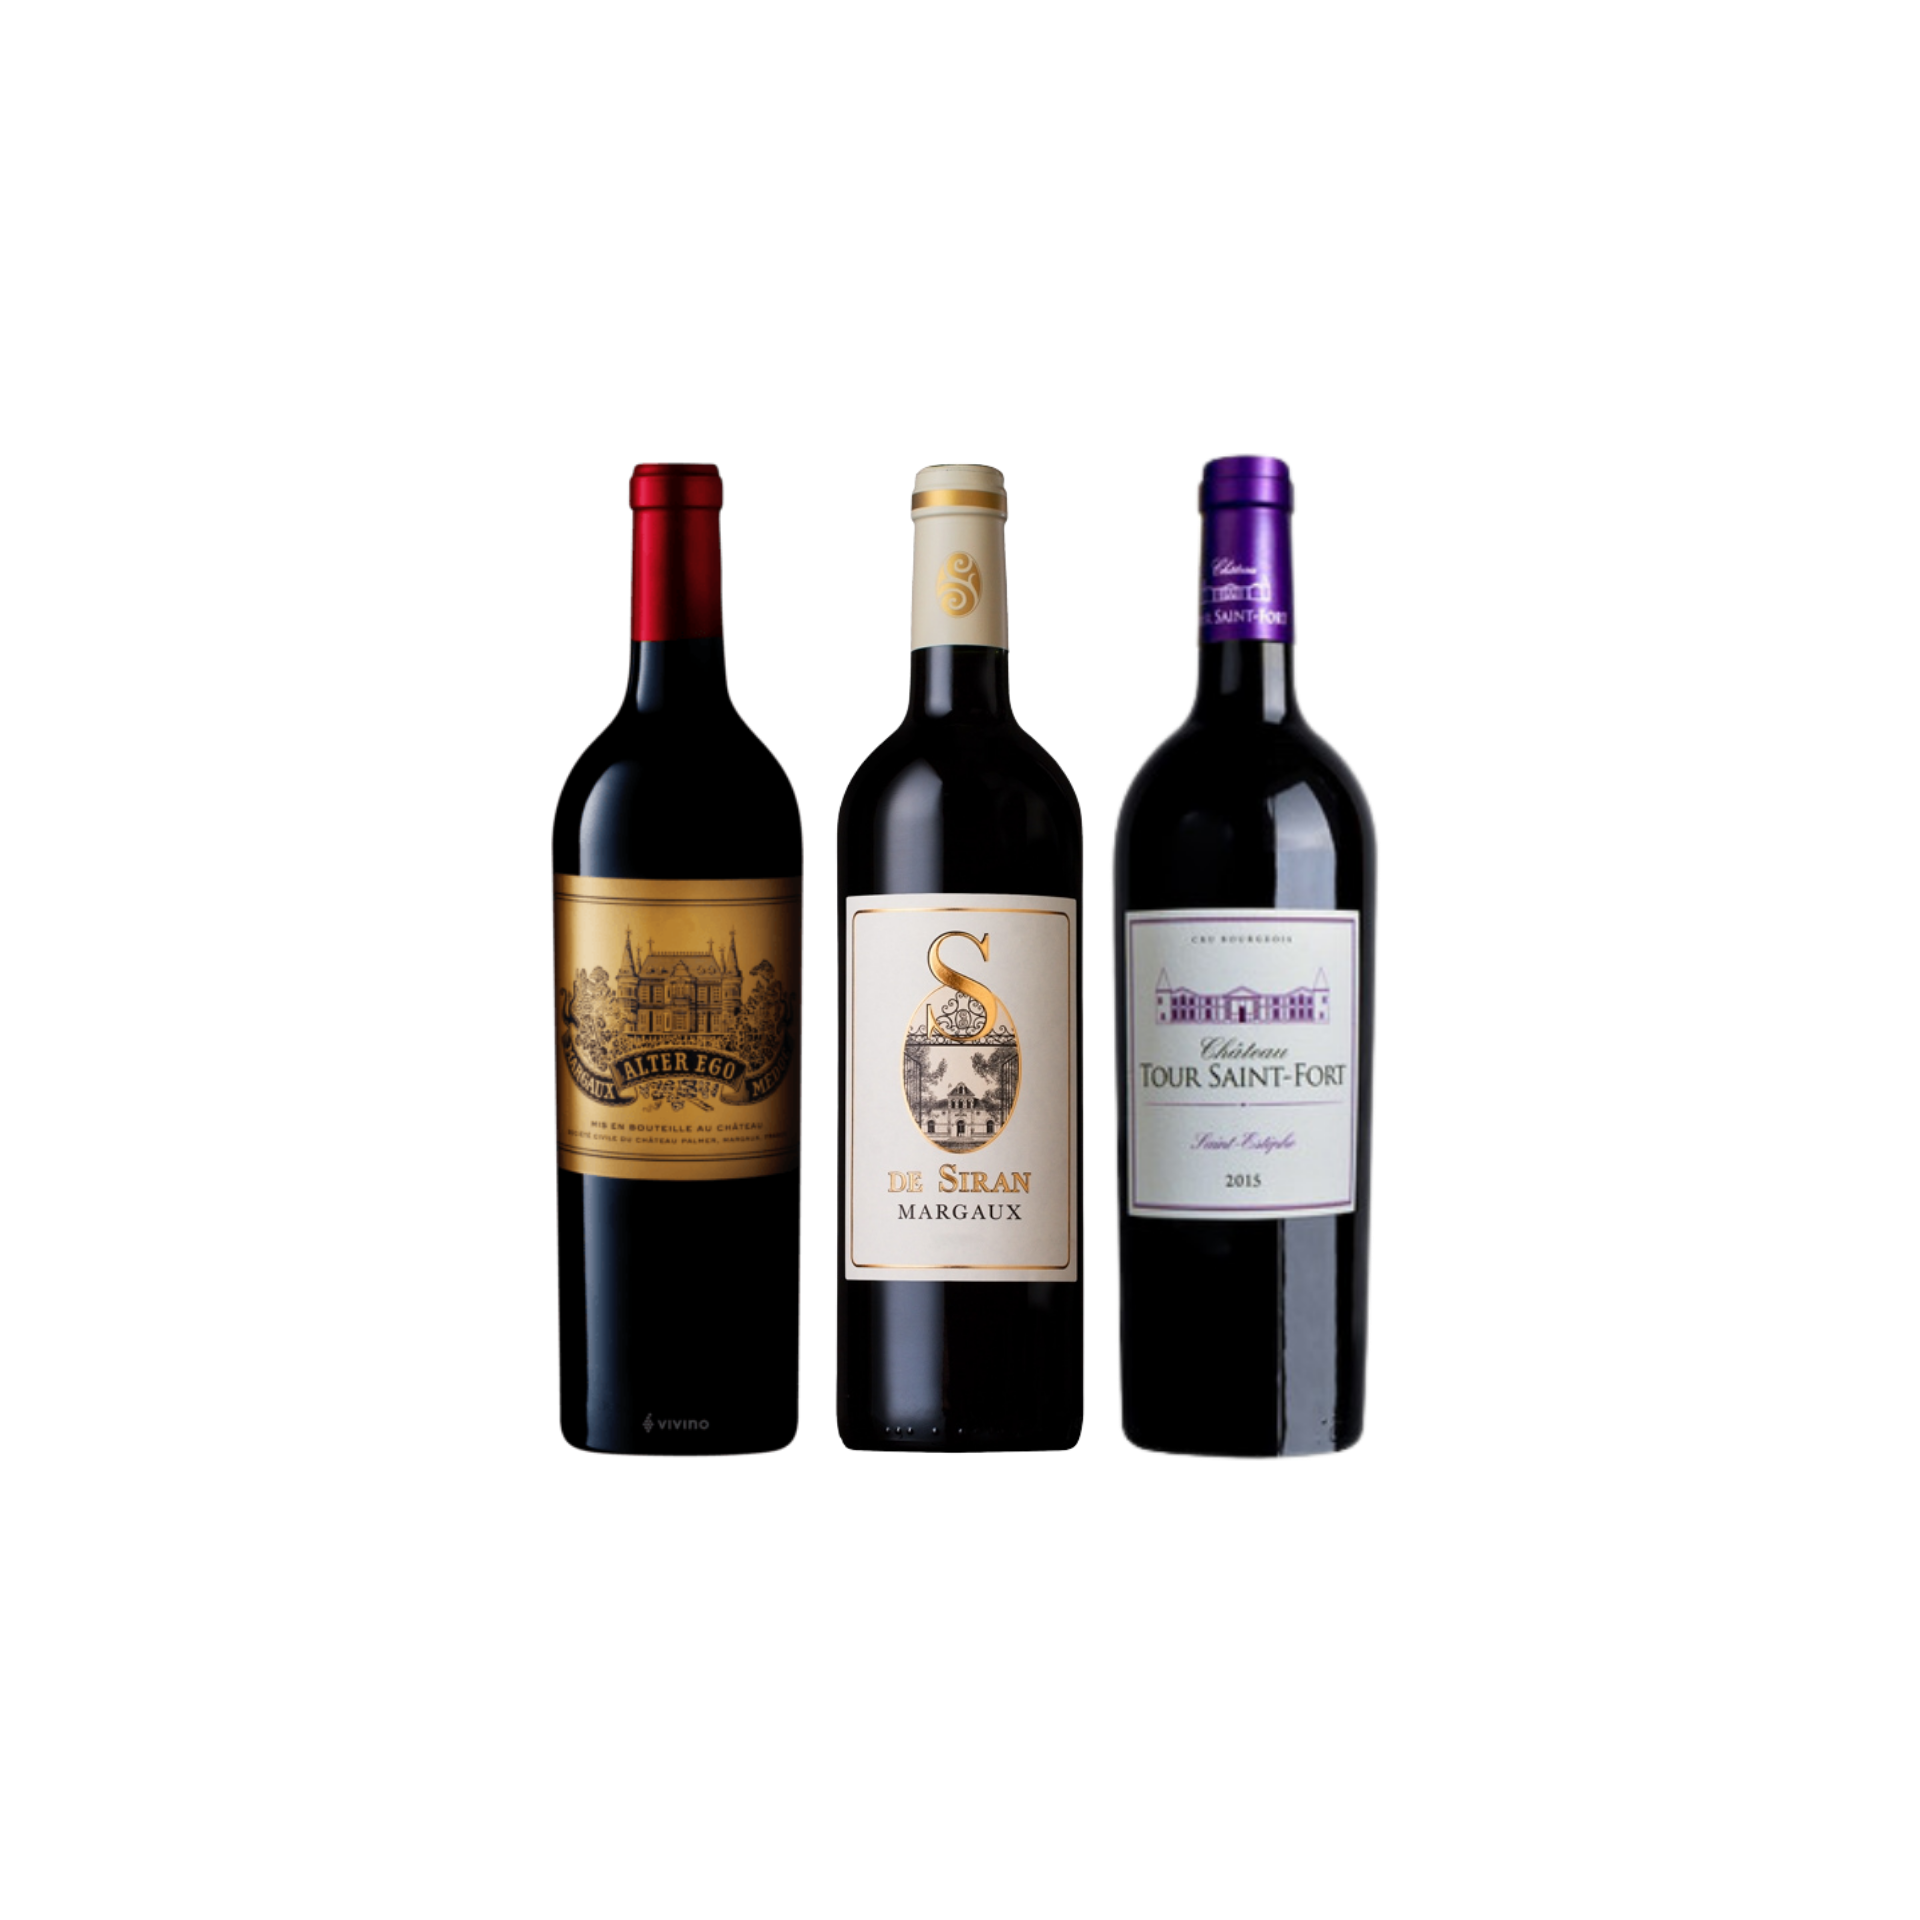 Enjoy 3 Bottles of French Red Wine From Margaux and Saint-Estephe at Only $199